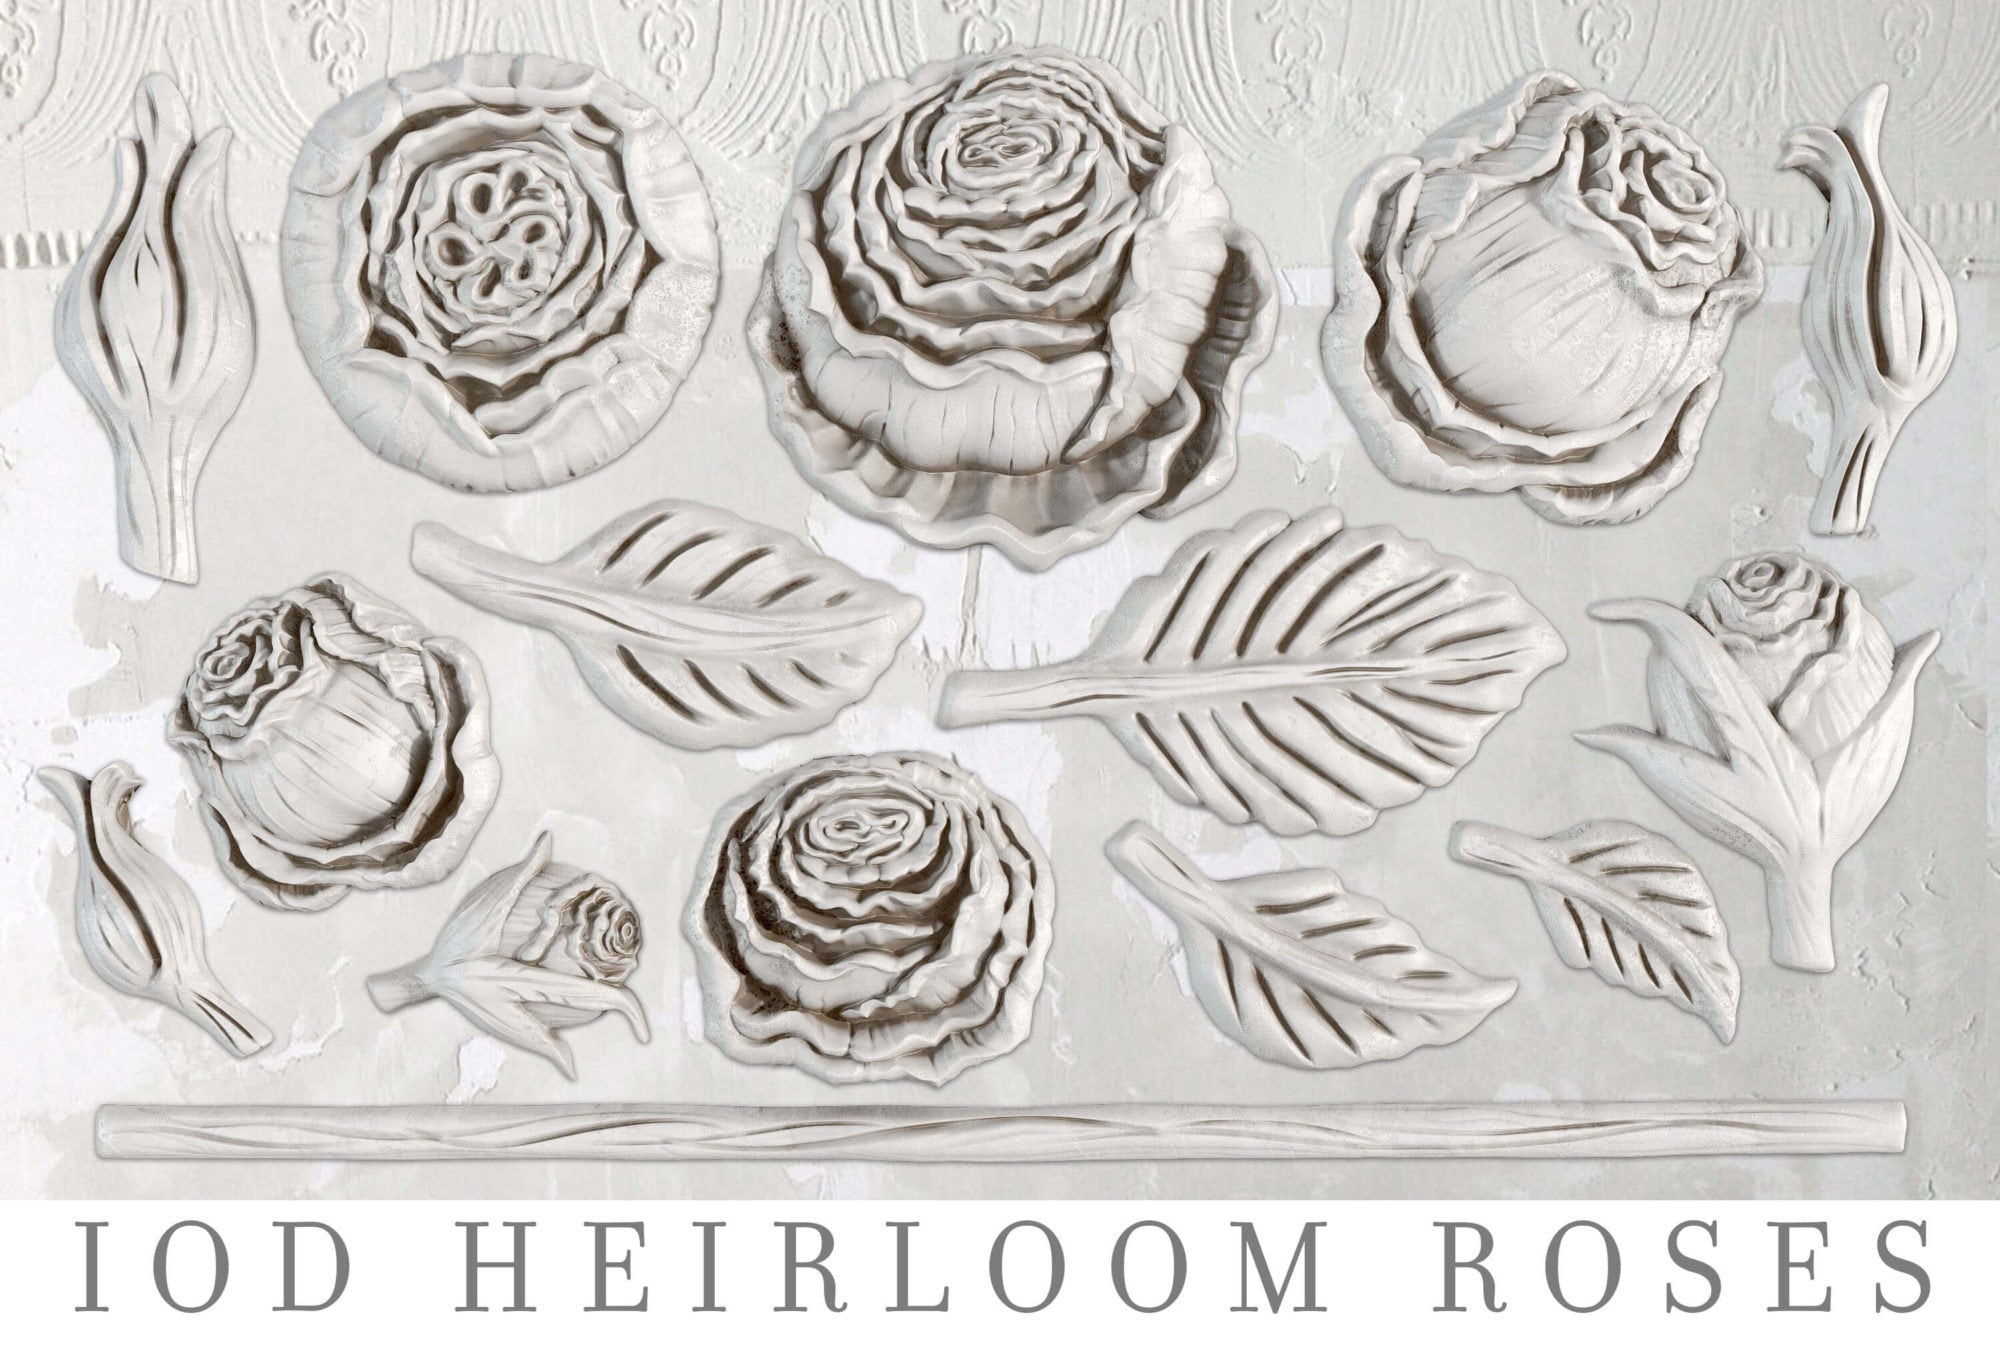 IOD Heirloom Roses Decor Mould, Flower Casting mould for crafts, craft supply, soap mold, resin mold, French country mold, candy mold,